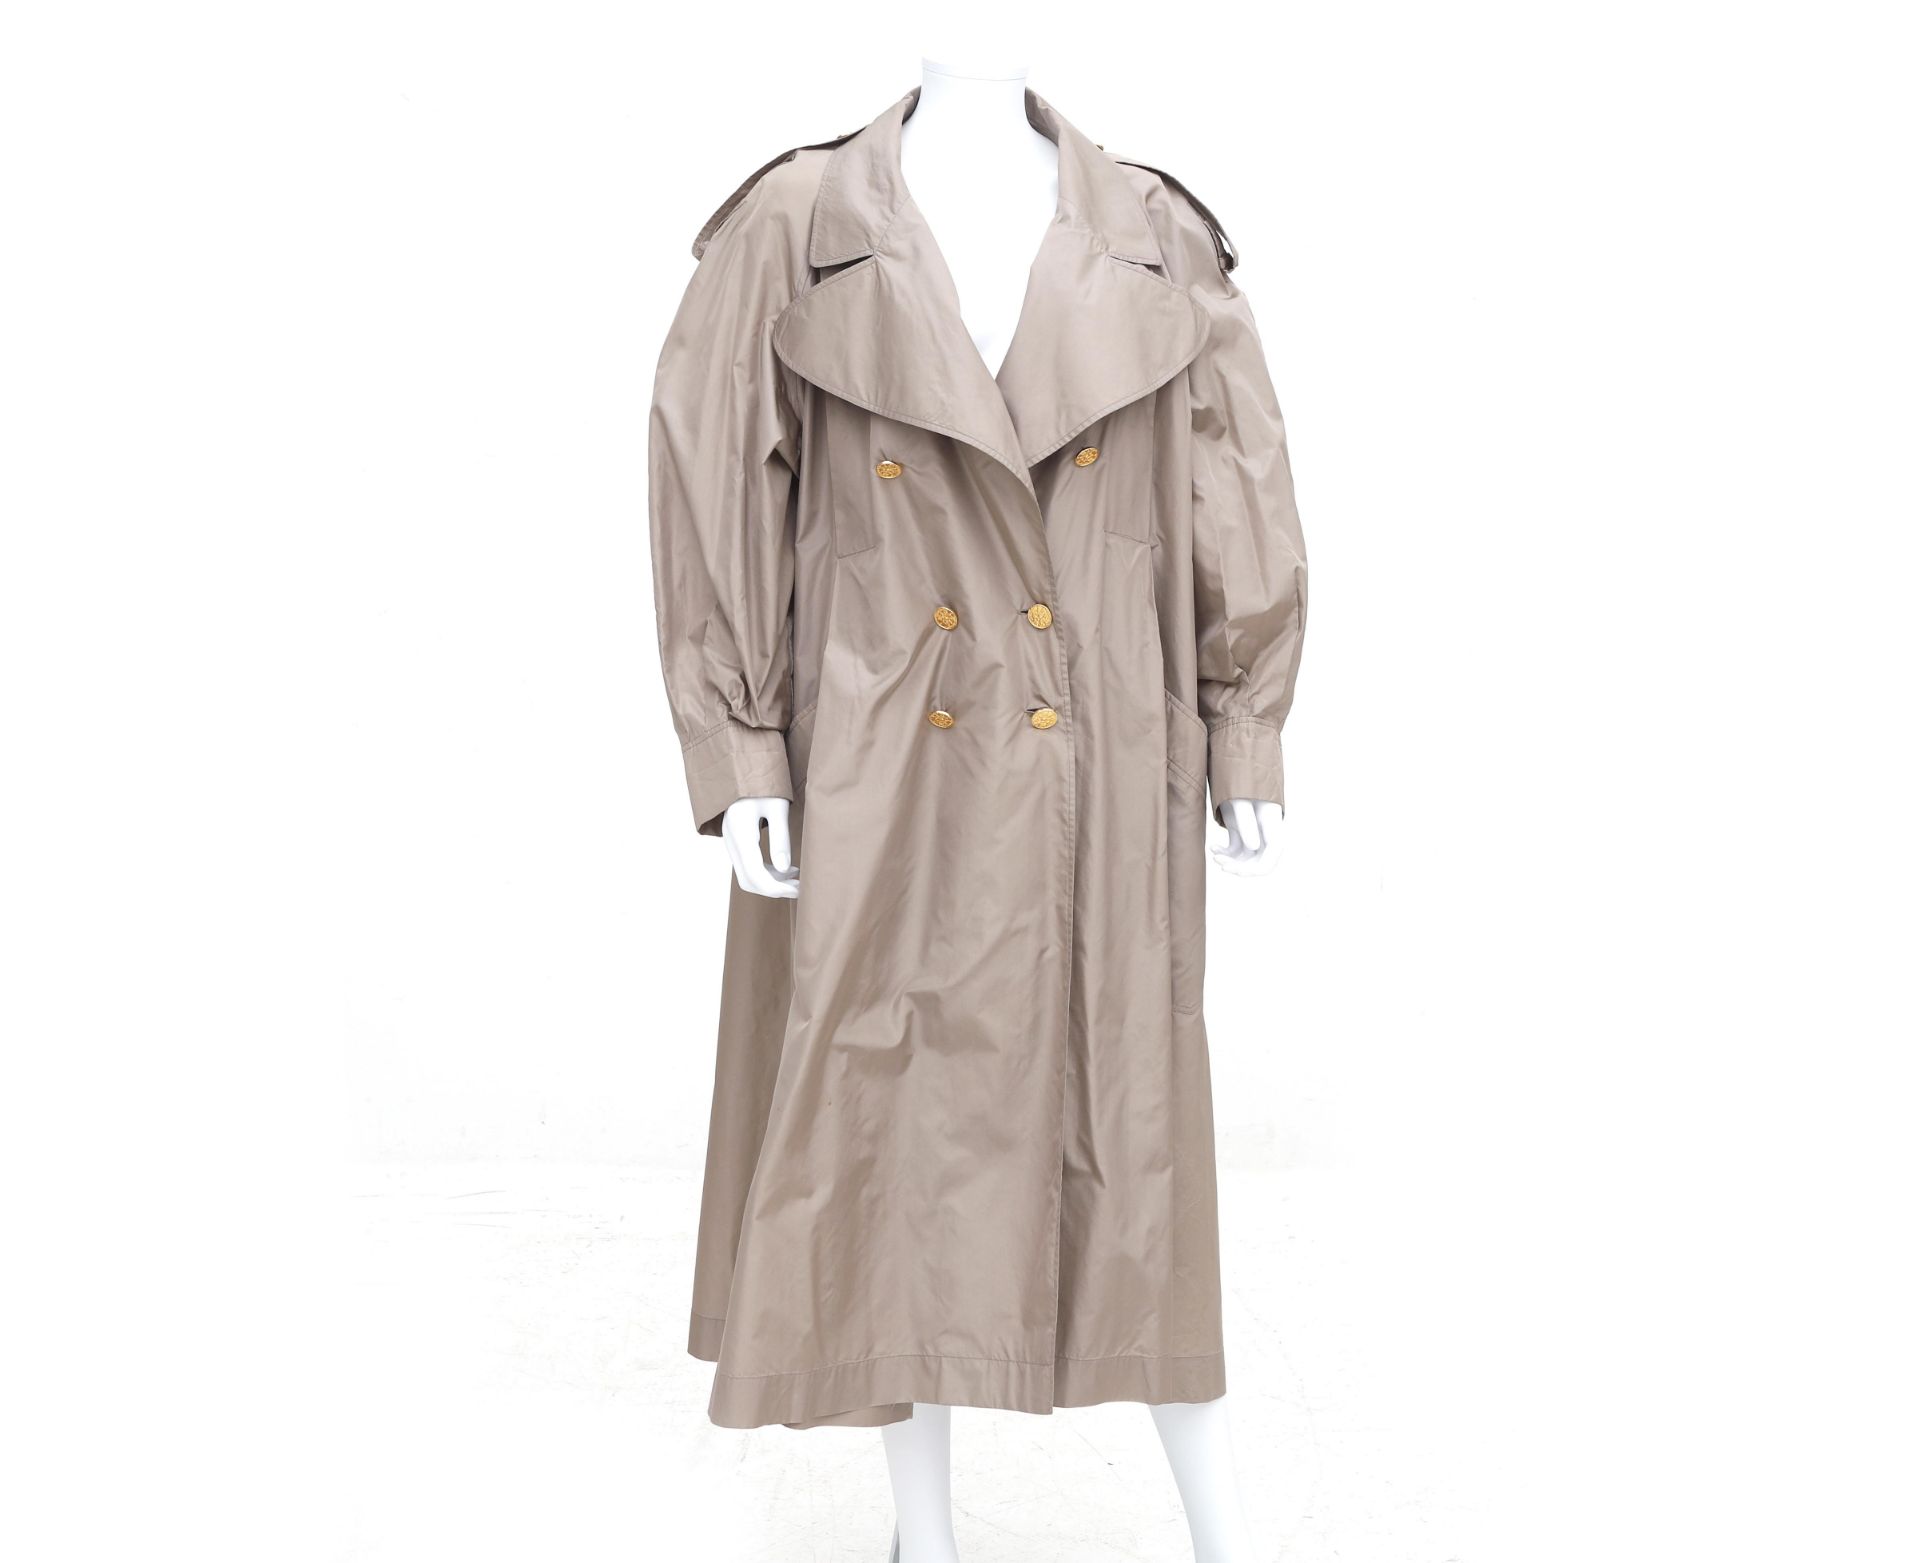 A camel Chanel Boutique trench coat. Comes with a matching belt and has gold coloured 'Coco'